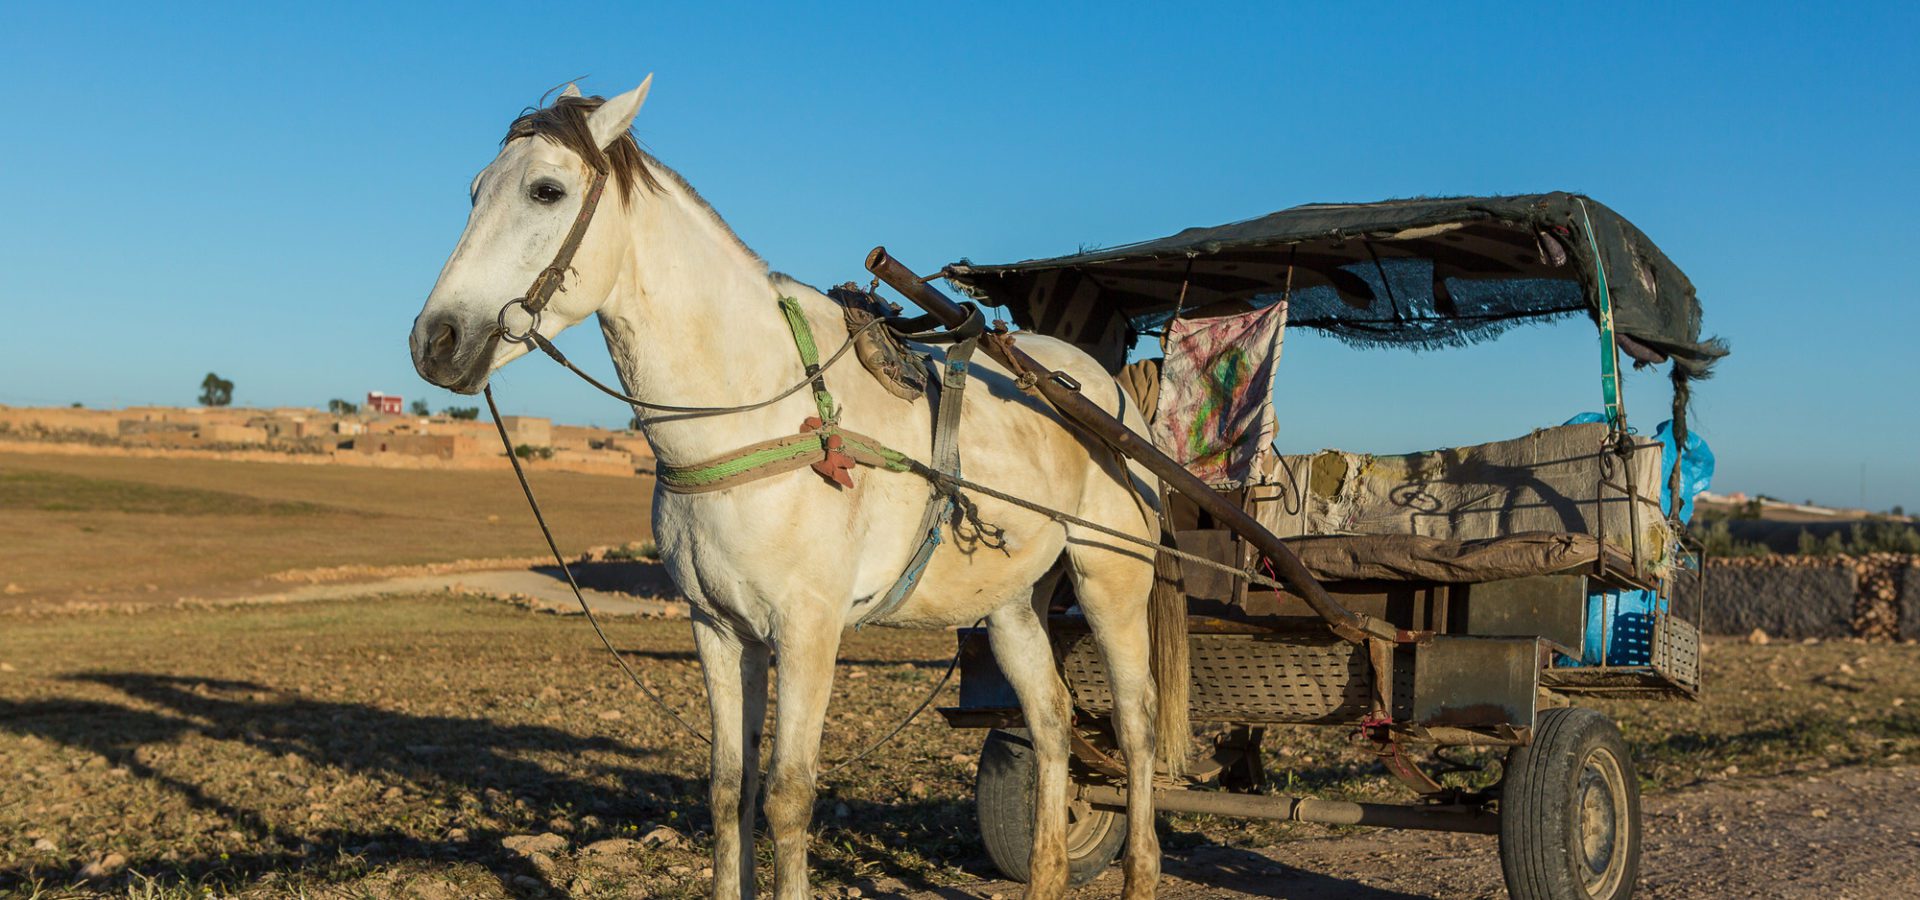 White working horse pulling cart in Morocco